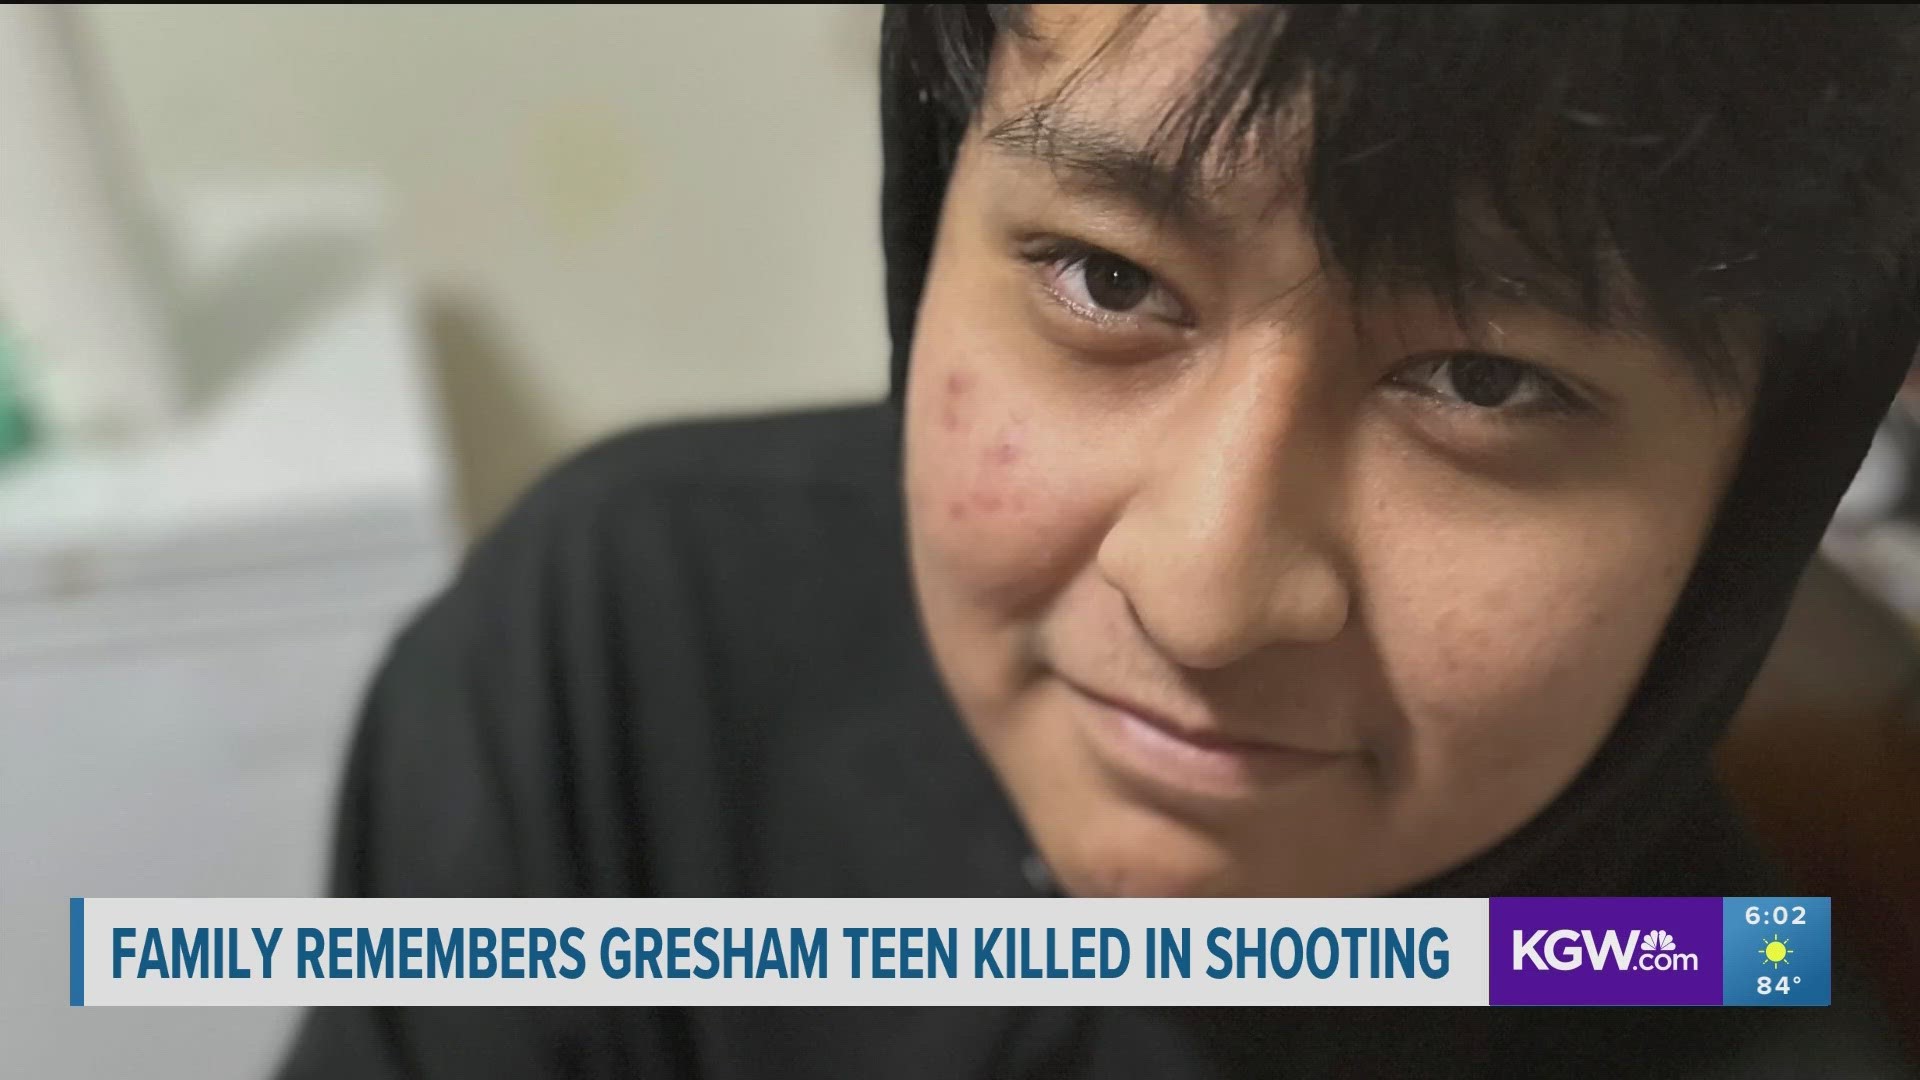 The 16-year-old was injured in the shooting two weeks ago and died at the hospital. Another teen was arrested as a suspect.